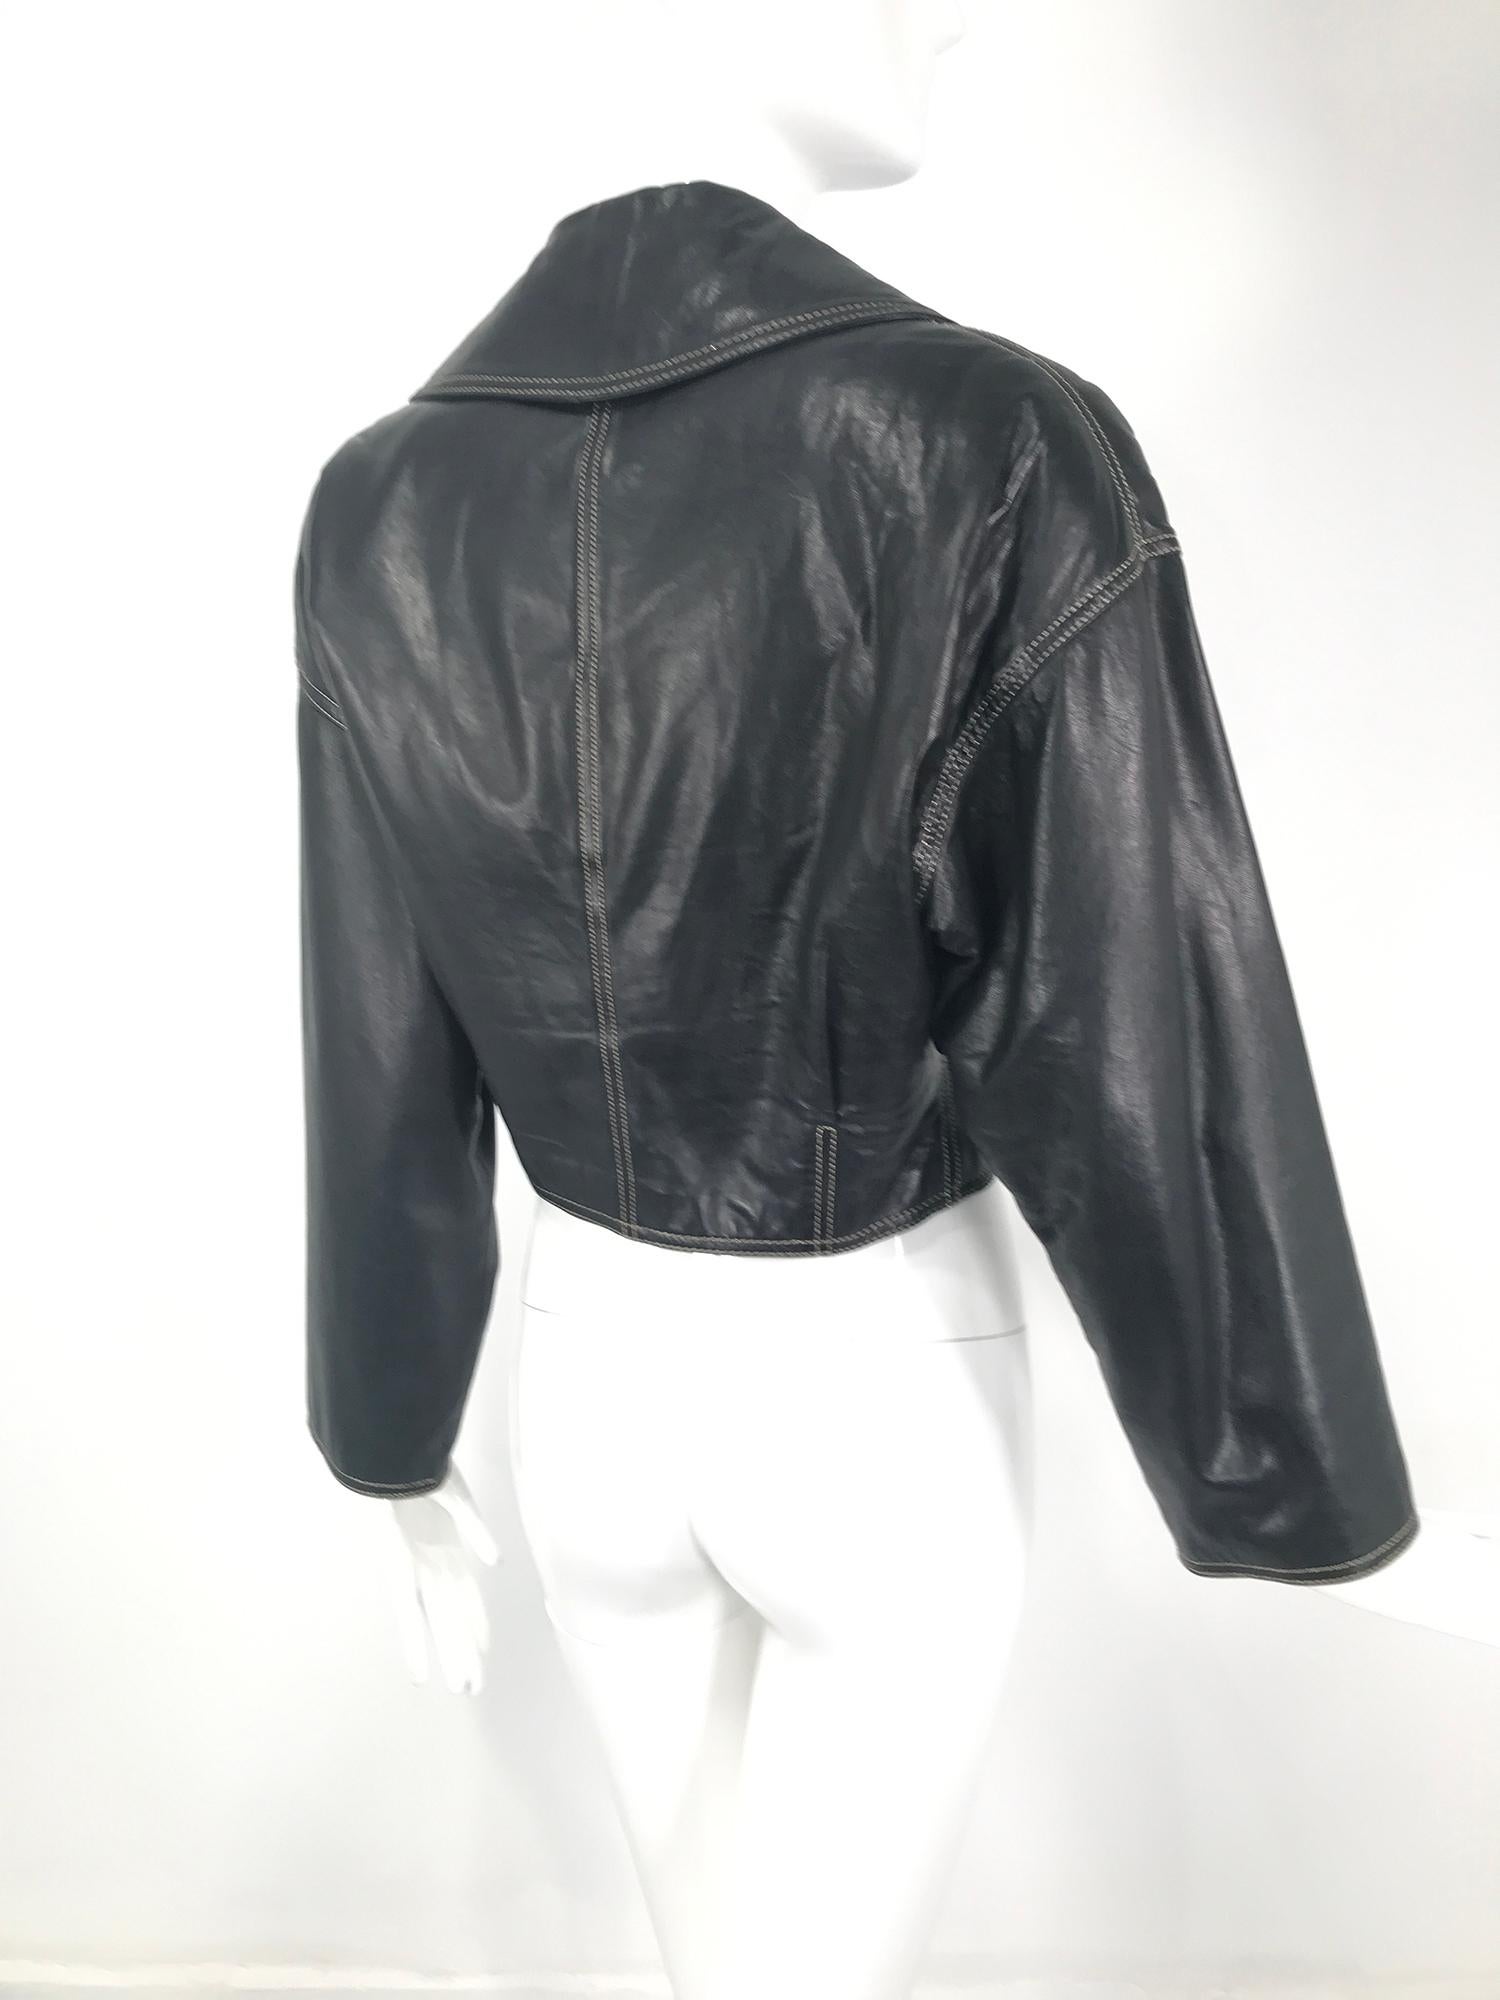 Genny Black Leather Bomber Jacket With Rhinestone Buttons & Gold Stitching 1980s 1